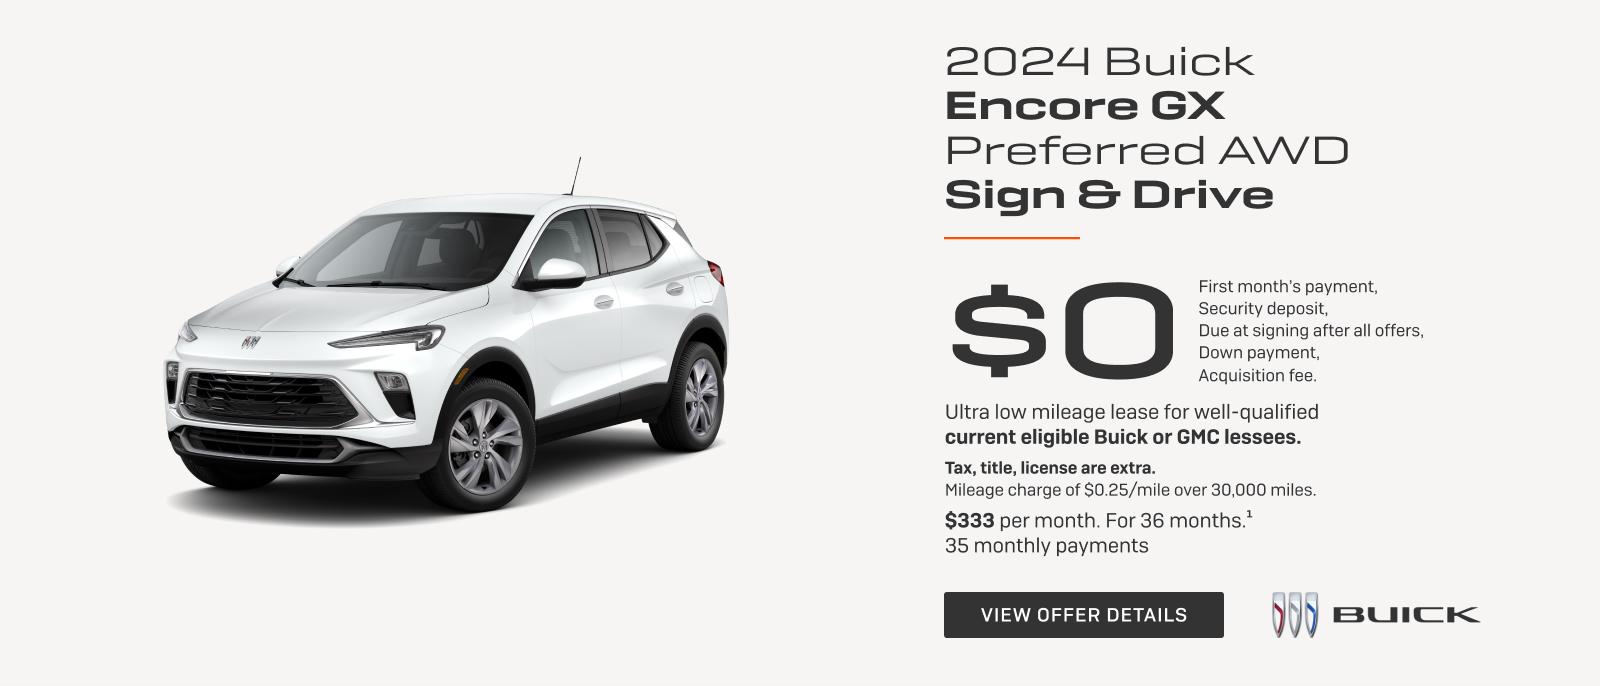 SIGN & DRIVE

$0
FIRST MONTH'S PAYMENT
SECURITY DEPOSIT
DUE AT LEASE SIGNING AFTER ALL OFFERS
DOWN PAYMENT
ACQUISITION FEES

Ultra low mileage lease for well-qualified current eligible Buick or GMC lessees.

Tax, title, license are extra. Mileage charge of $0.25/mile over 32,500 miles.

$283 per month. For 39 months.1
38 monthly payments